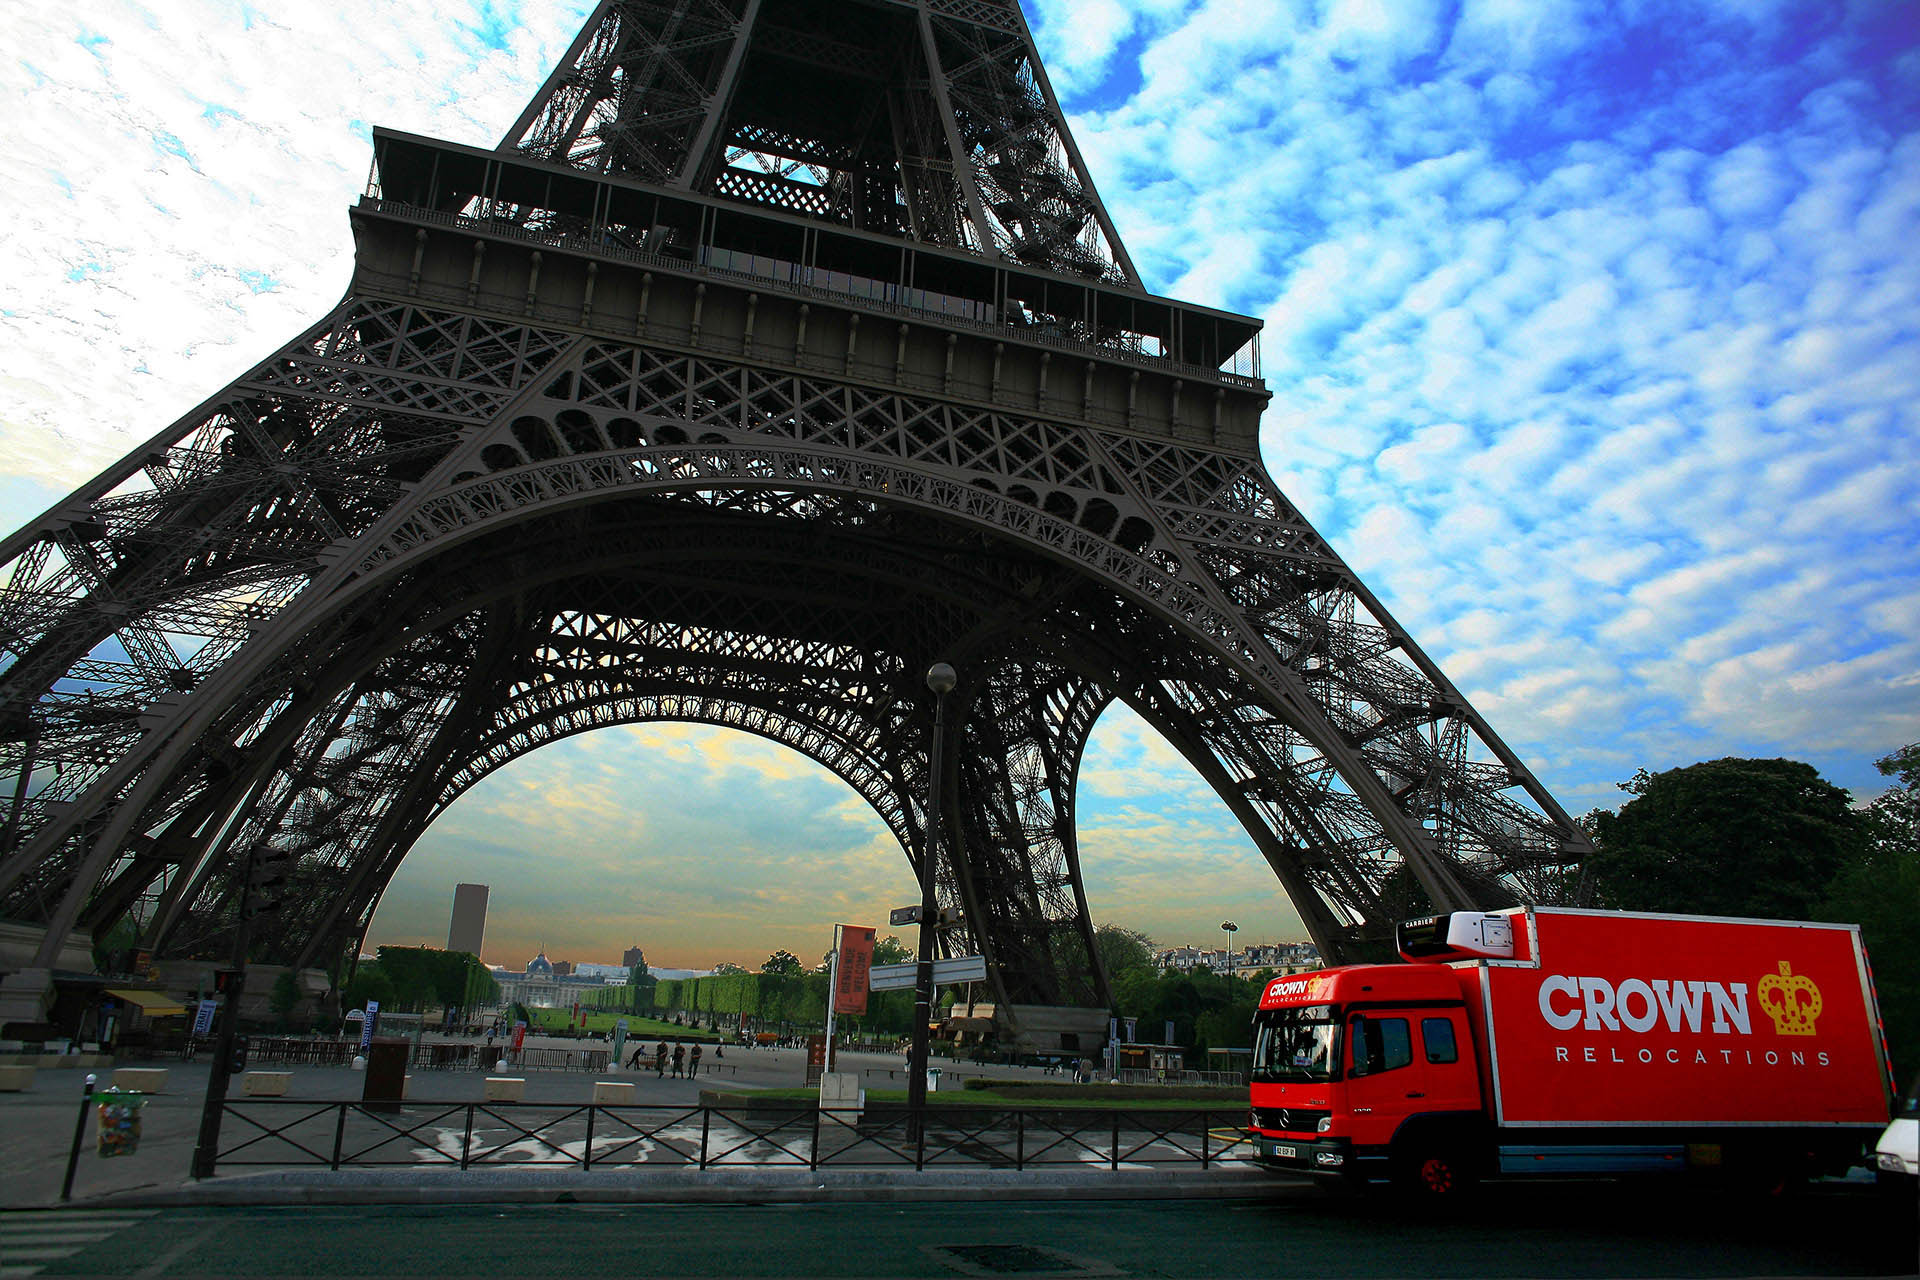 Removal truck parked under the Eiffel Tower in Paris, France 